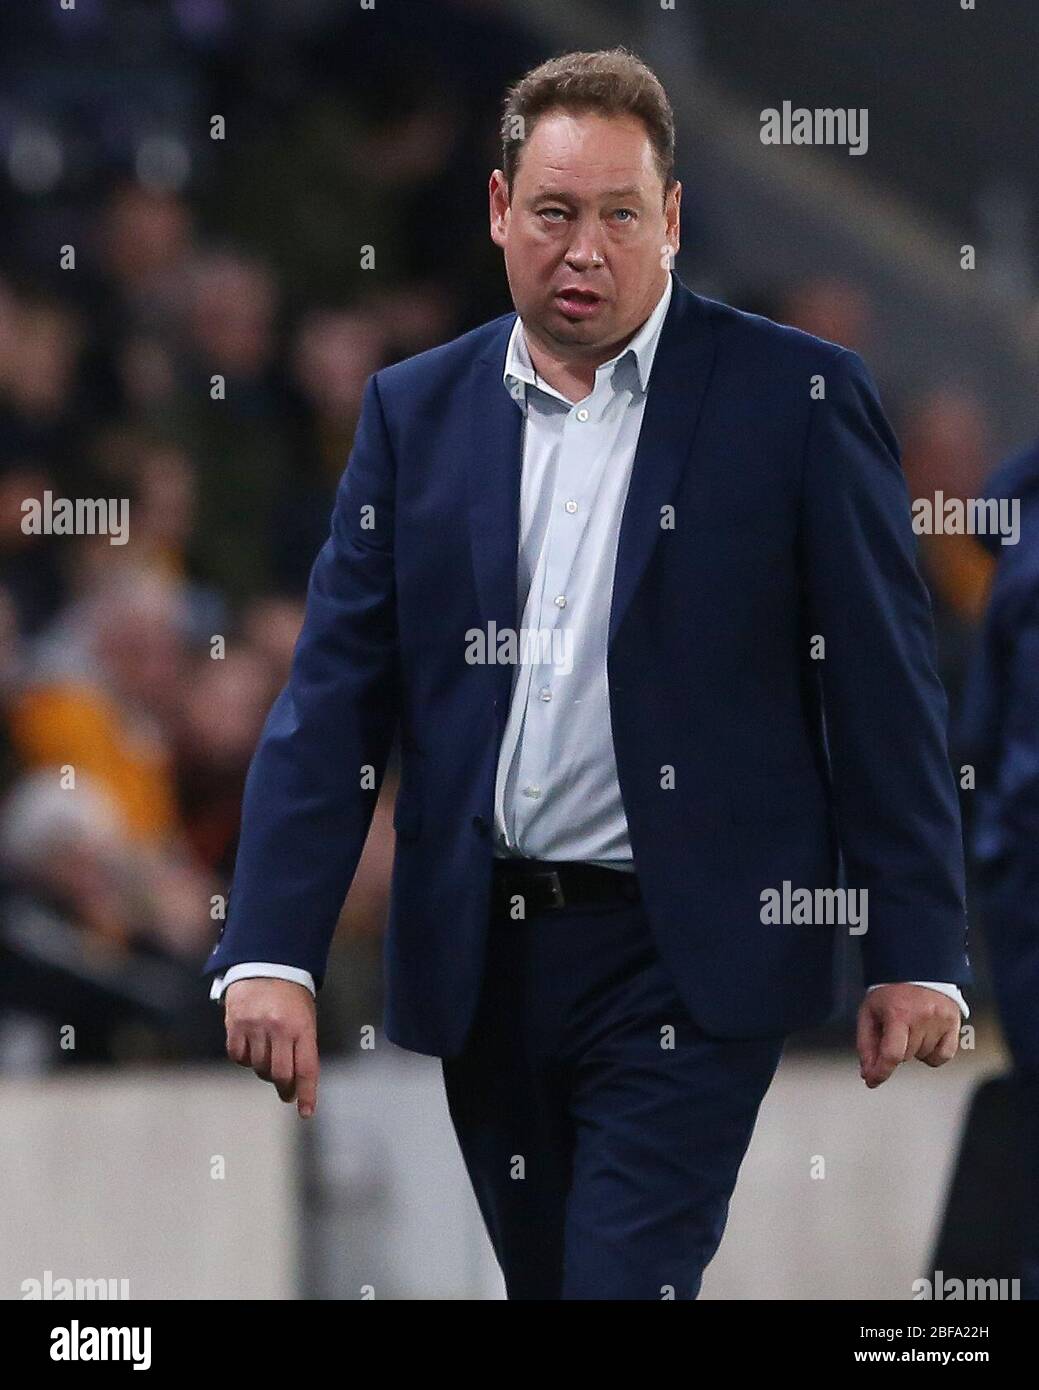 KINGSTON UPON HULL, UK. Hull City manager Leonid Slutsky during the Sky Bet Championship match between Hull City and Middlesbrough at the KC Stadium, Kingston upon Hull on Tuesday 31st October 2017. (Credit: Mark Fletcher | MI News) Stock Photo